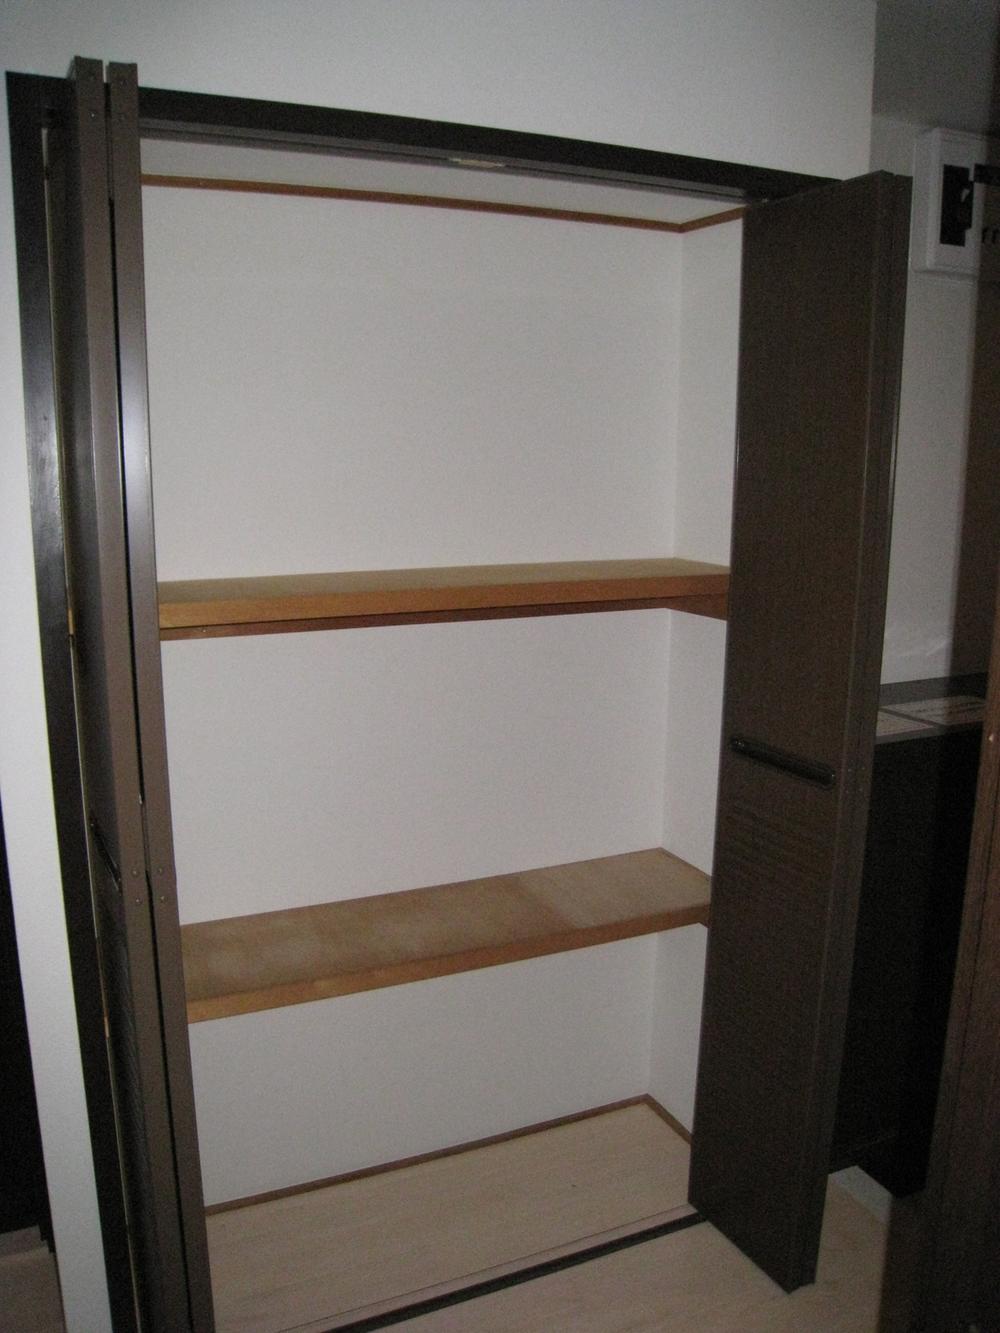 Receipt. It is a large storage shelves in the entrance hall!